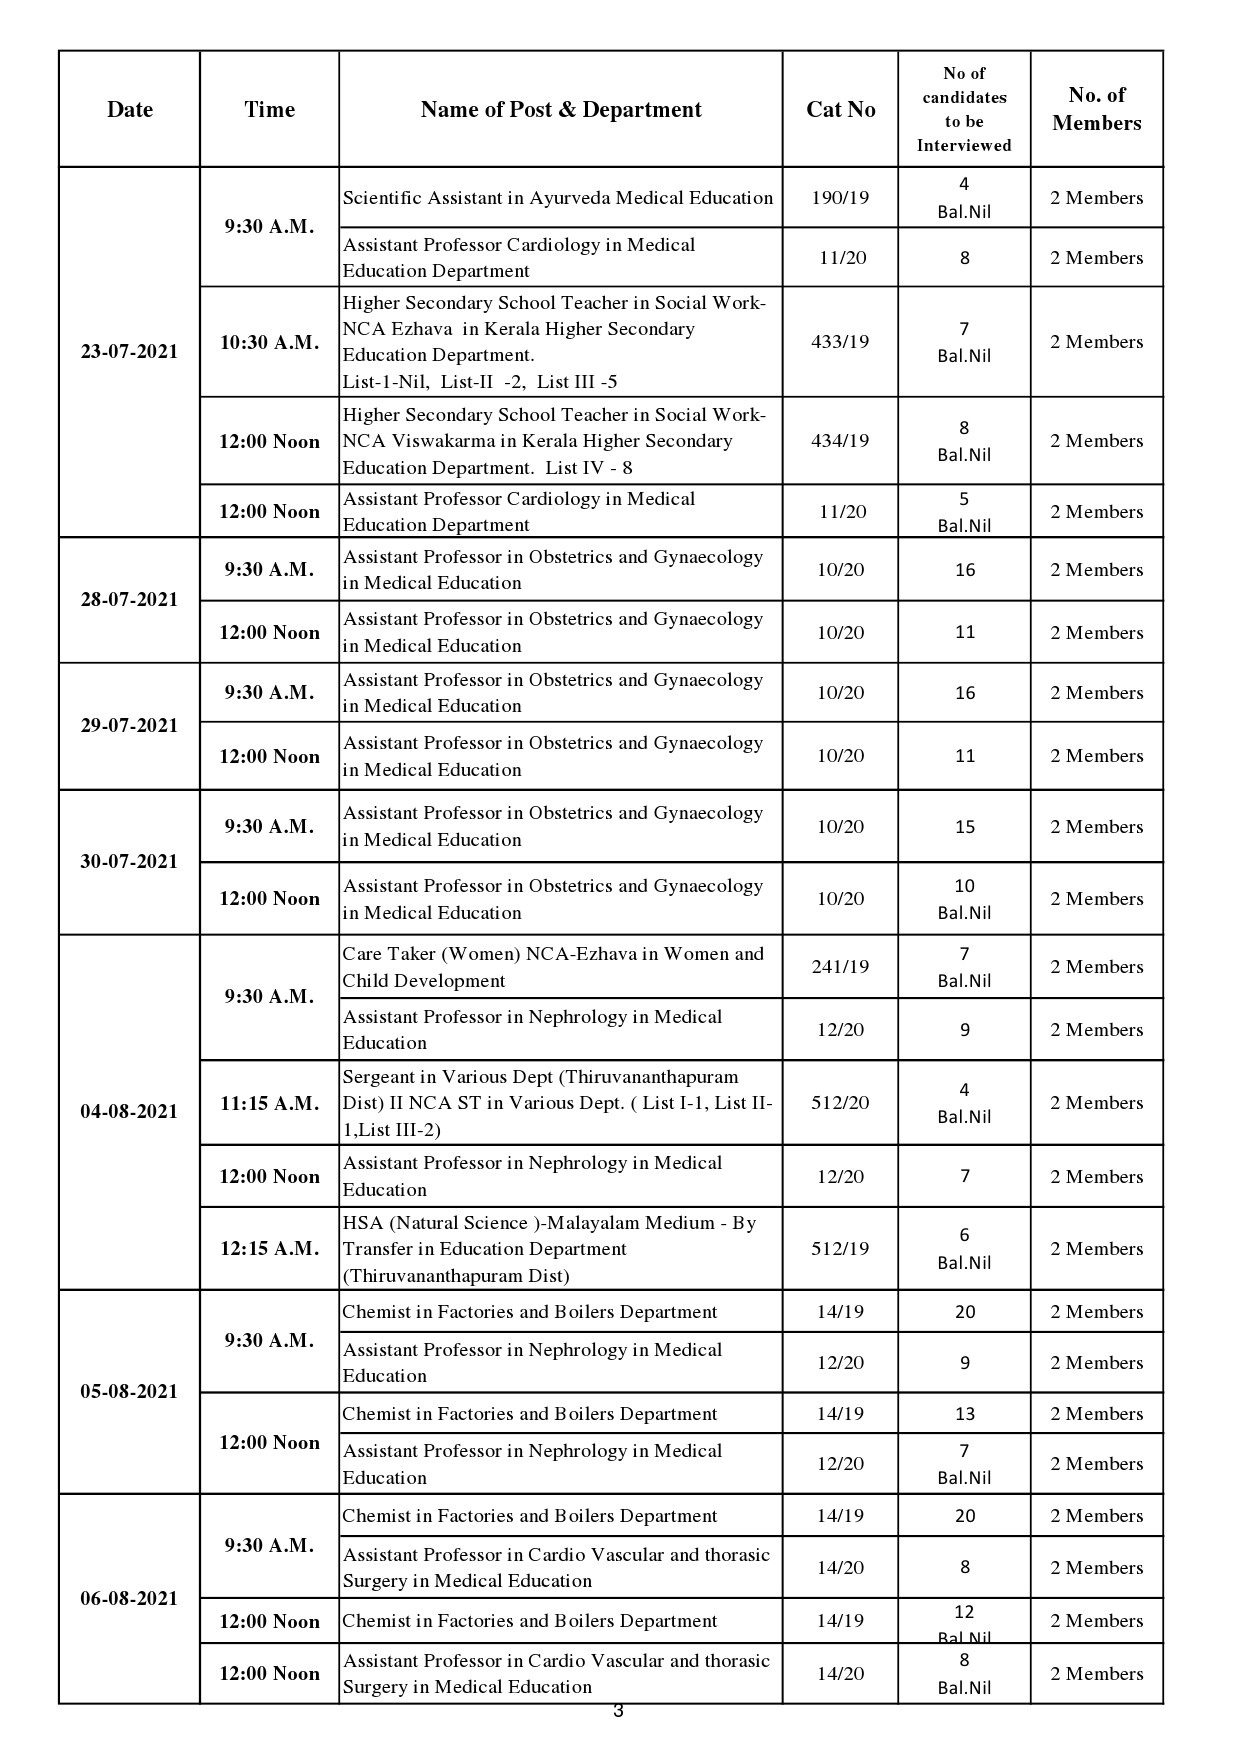 KPSC Interview Programme Of July And August 2021 - Notification Image 3